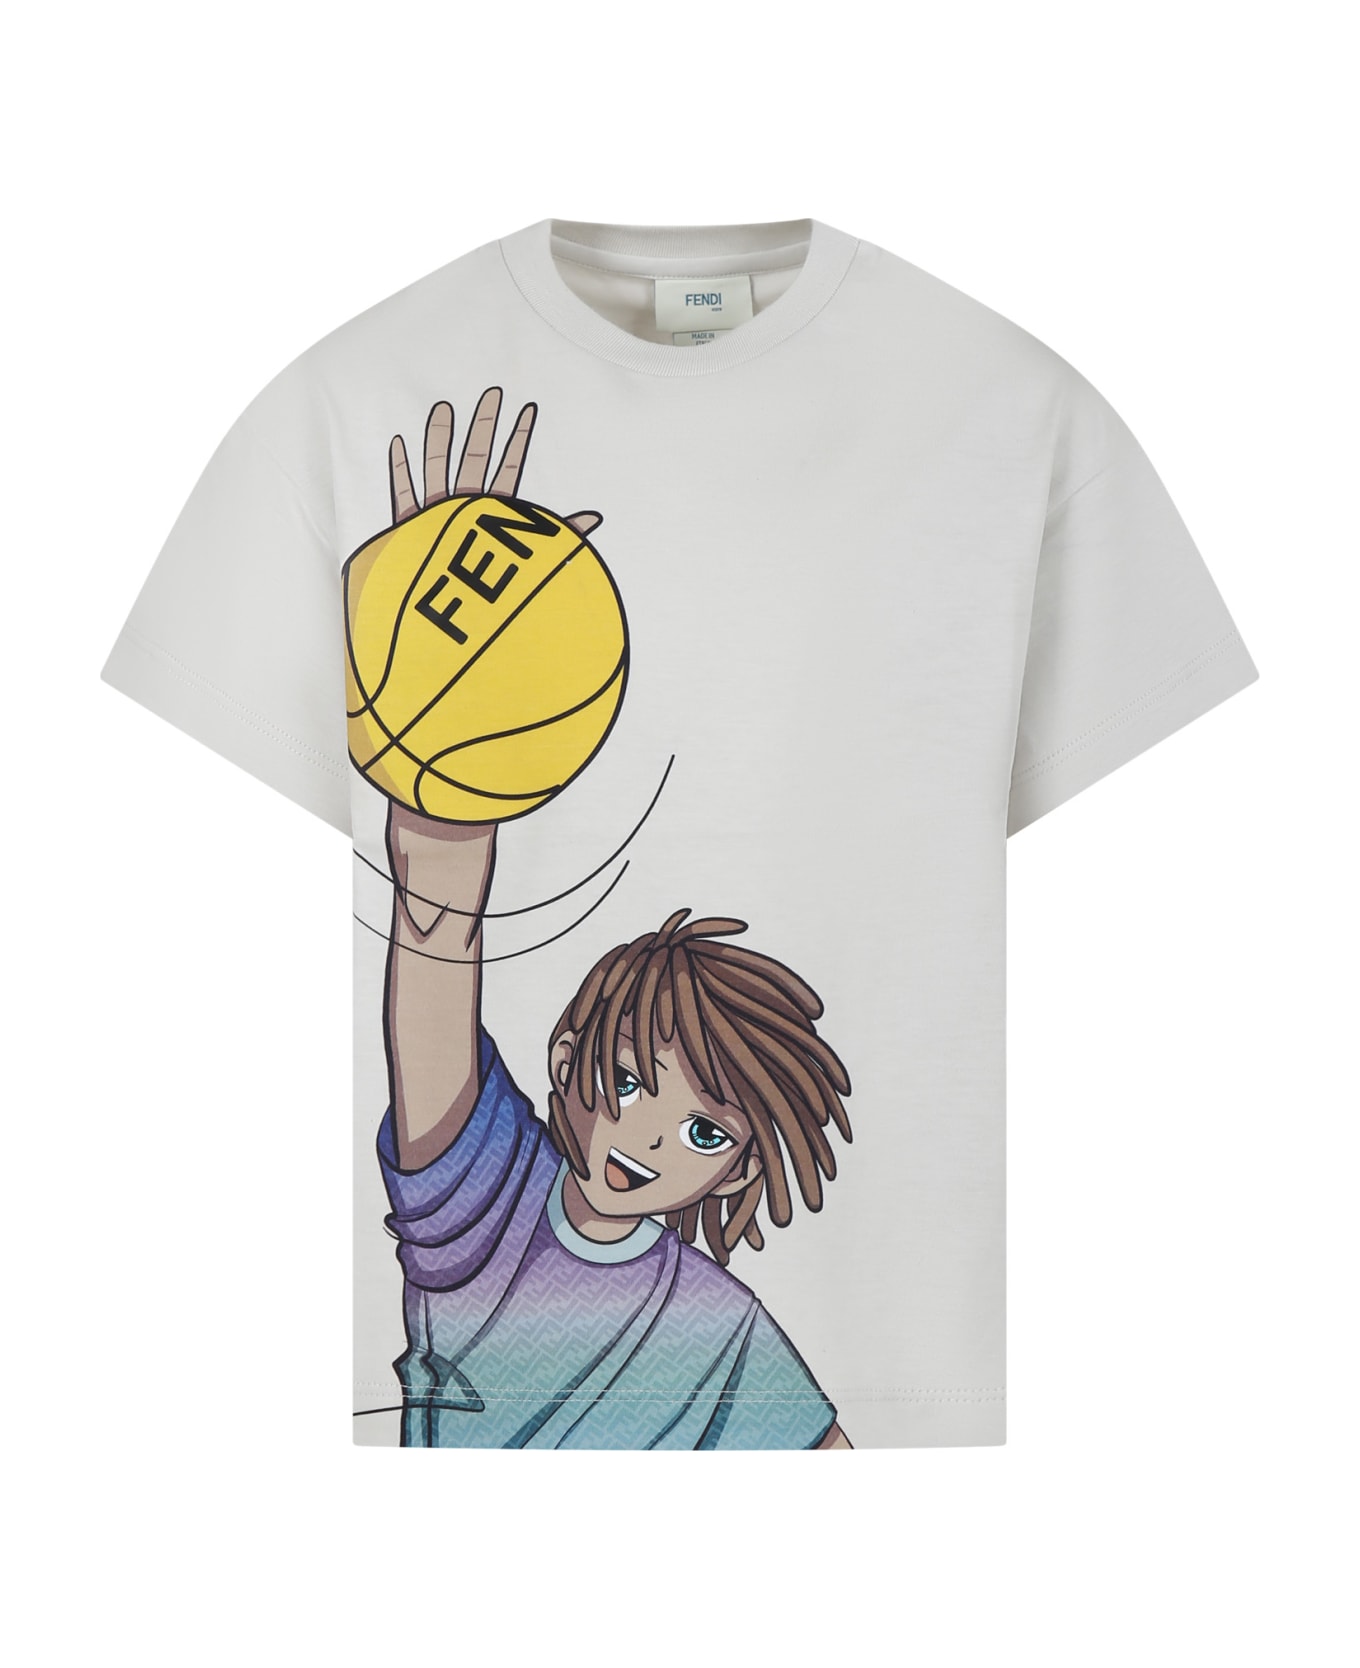 Fendi Beige T-shirt For Boy With Print And Ff - Beige